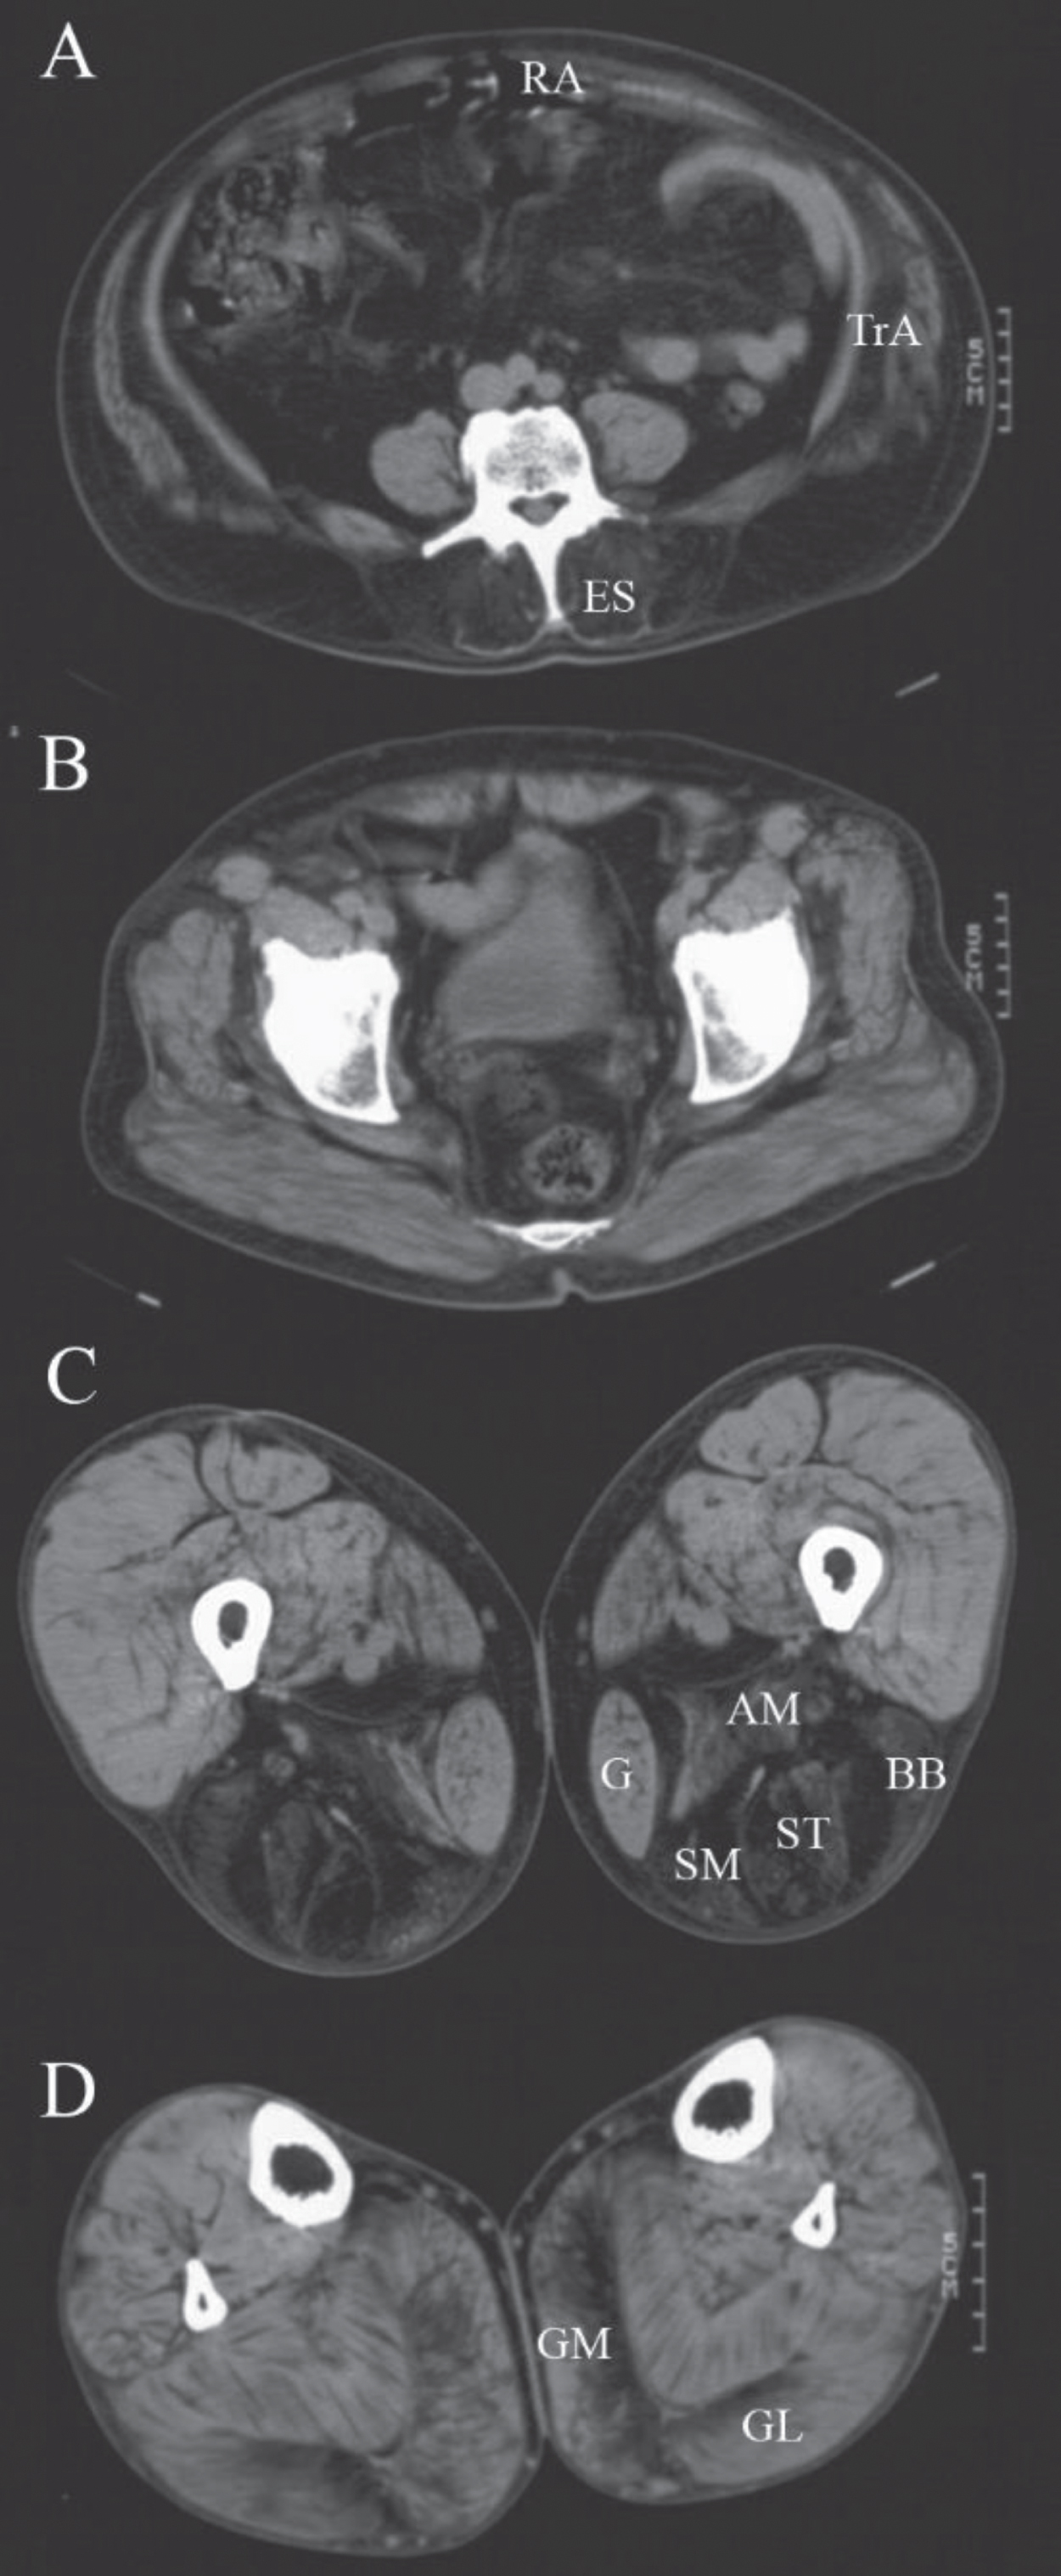 Muscle computed tomography of patient 9. CT-scan at the level of the lumbar spine (A), the pelvis (B), the thigh (C) and lower leg (D) of a male patient with GMPPB-related muscular dystrophy (LGMDR19) showing prominent fatty degeneration of the erector spinae (ES), rectus abdominis (RA), transversus abdominis (TrA), adductor magnus (AM) and hamstring (BB = biceps femoris short head, ST = semitendinosus, SM = semimembranosus) muscles and to a lesser extent of the medial (GM) and lateral gastrocnemius (GL) muscles. The gastrocnemius and gracilis (G) muscles are also increased in size (pseudohypertrophy).